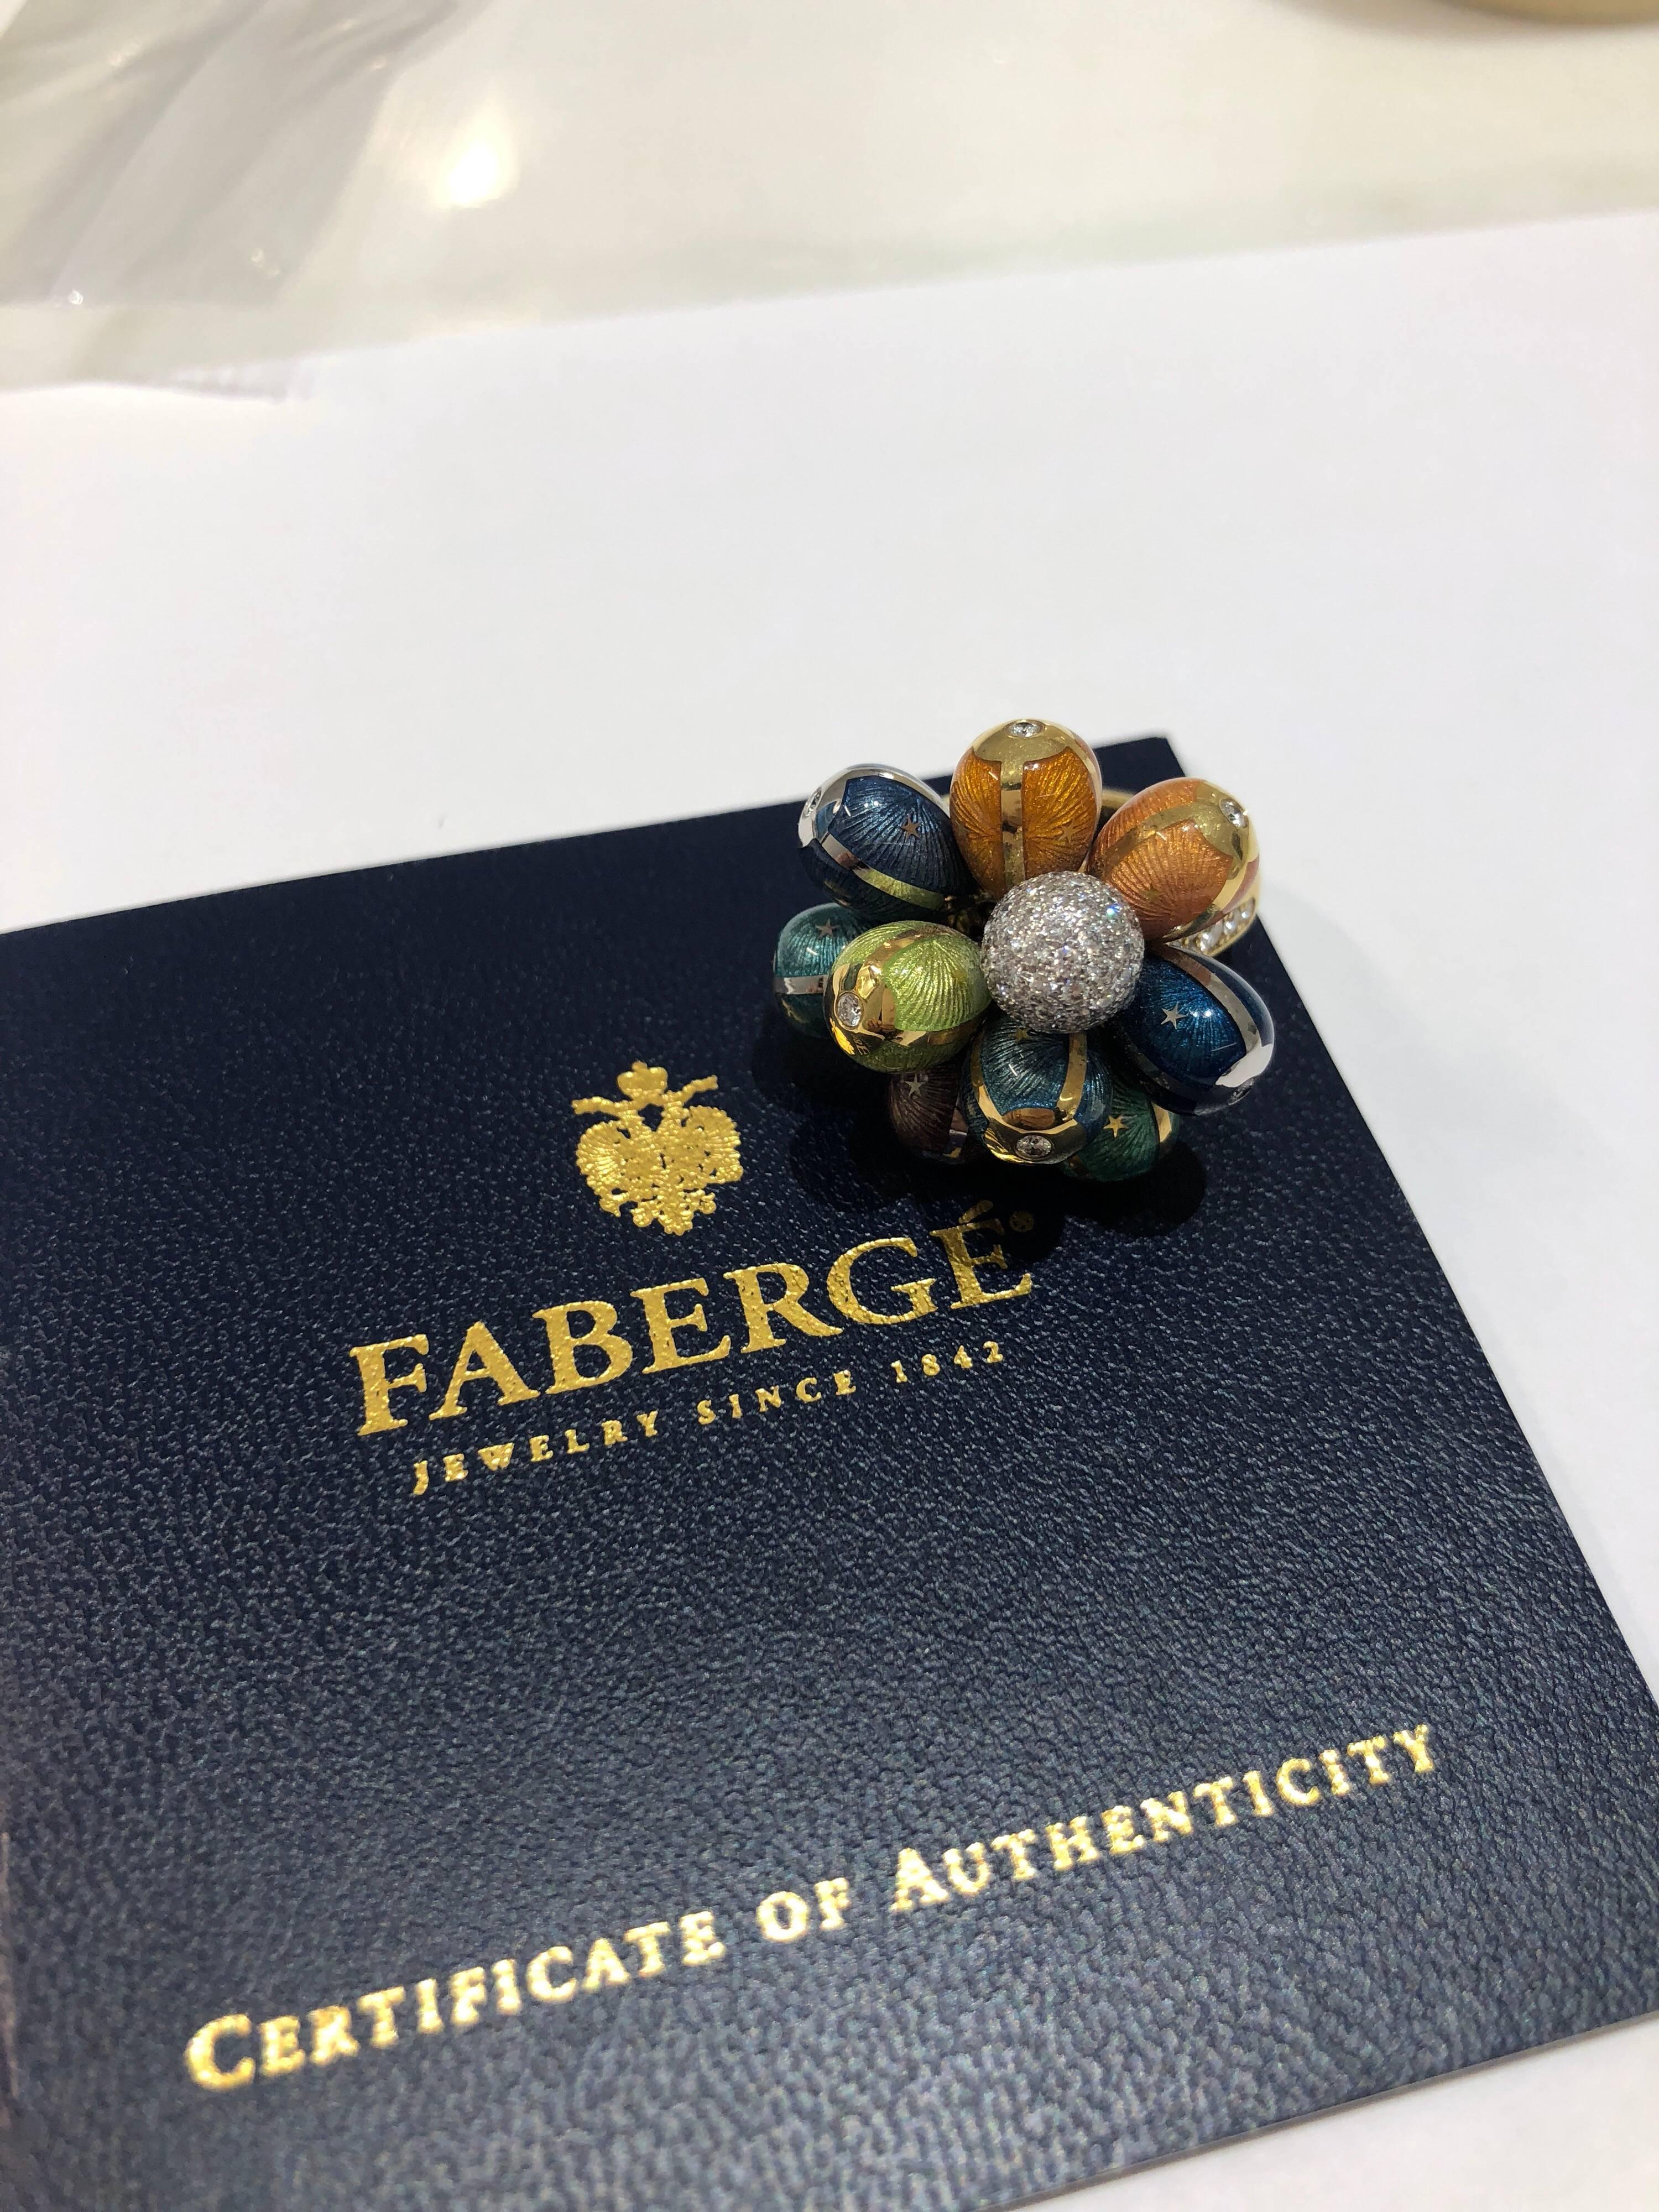 Round Cut Modern Faberge 1.53 Carat, Multicolored Enamel Egg Cluster Ring For Sale